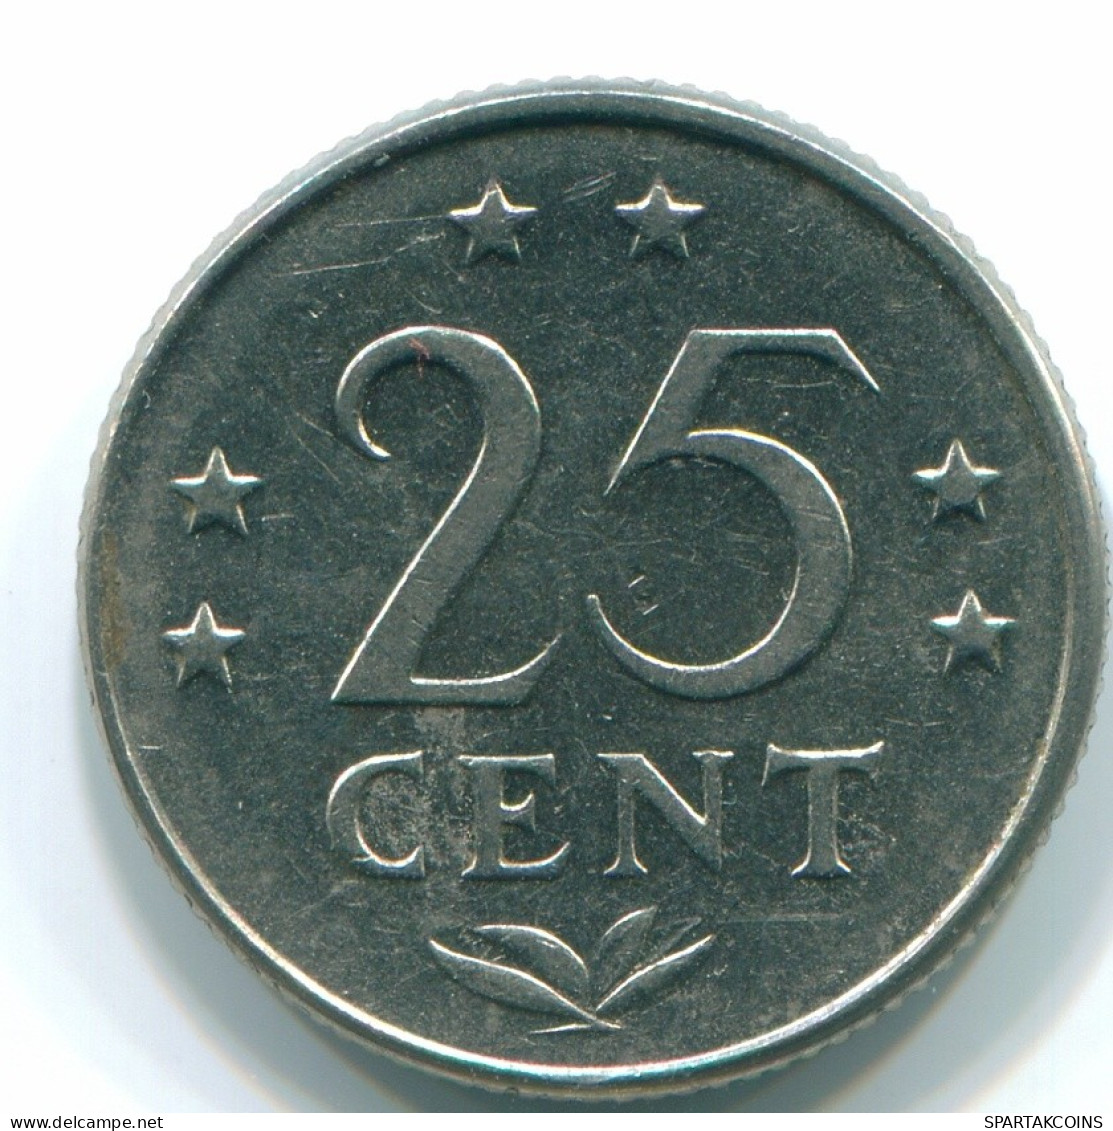 25 CENTS 1975 NETHERLANDS ANTILLES Nickel Colonial Coin #S11613.U.A - Antille Olandesi